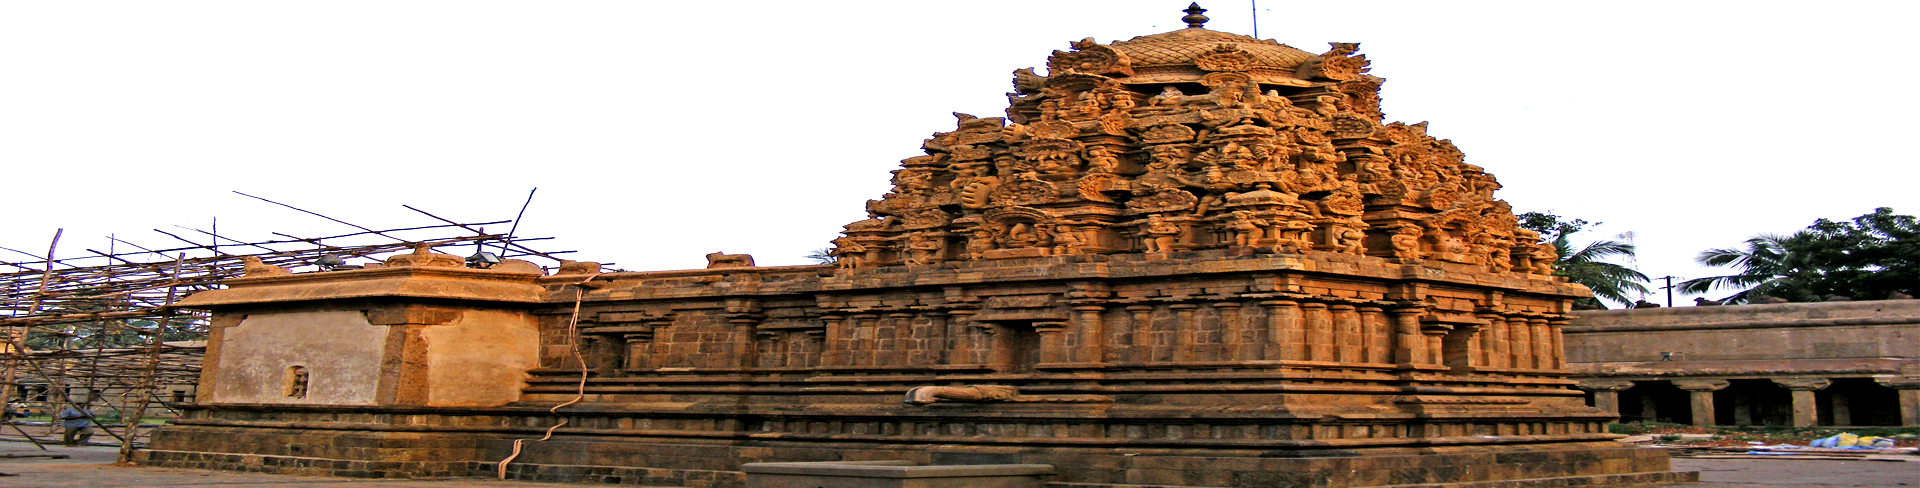 thanjavur tour packages from chennai